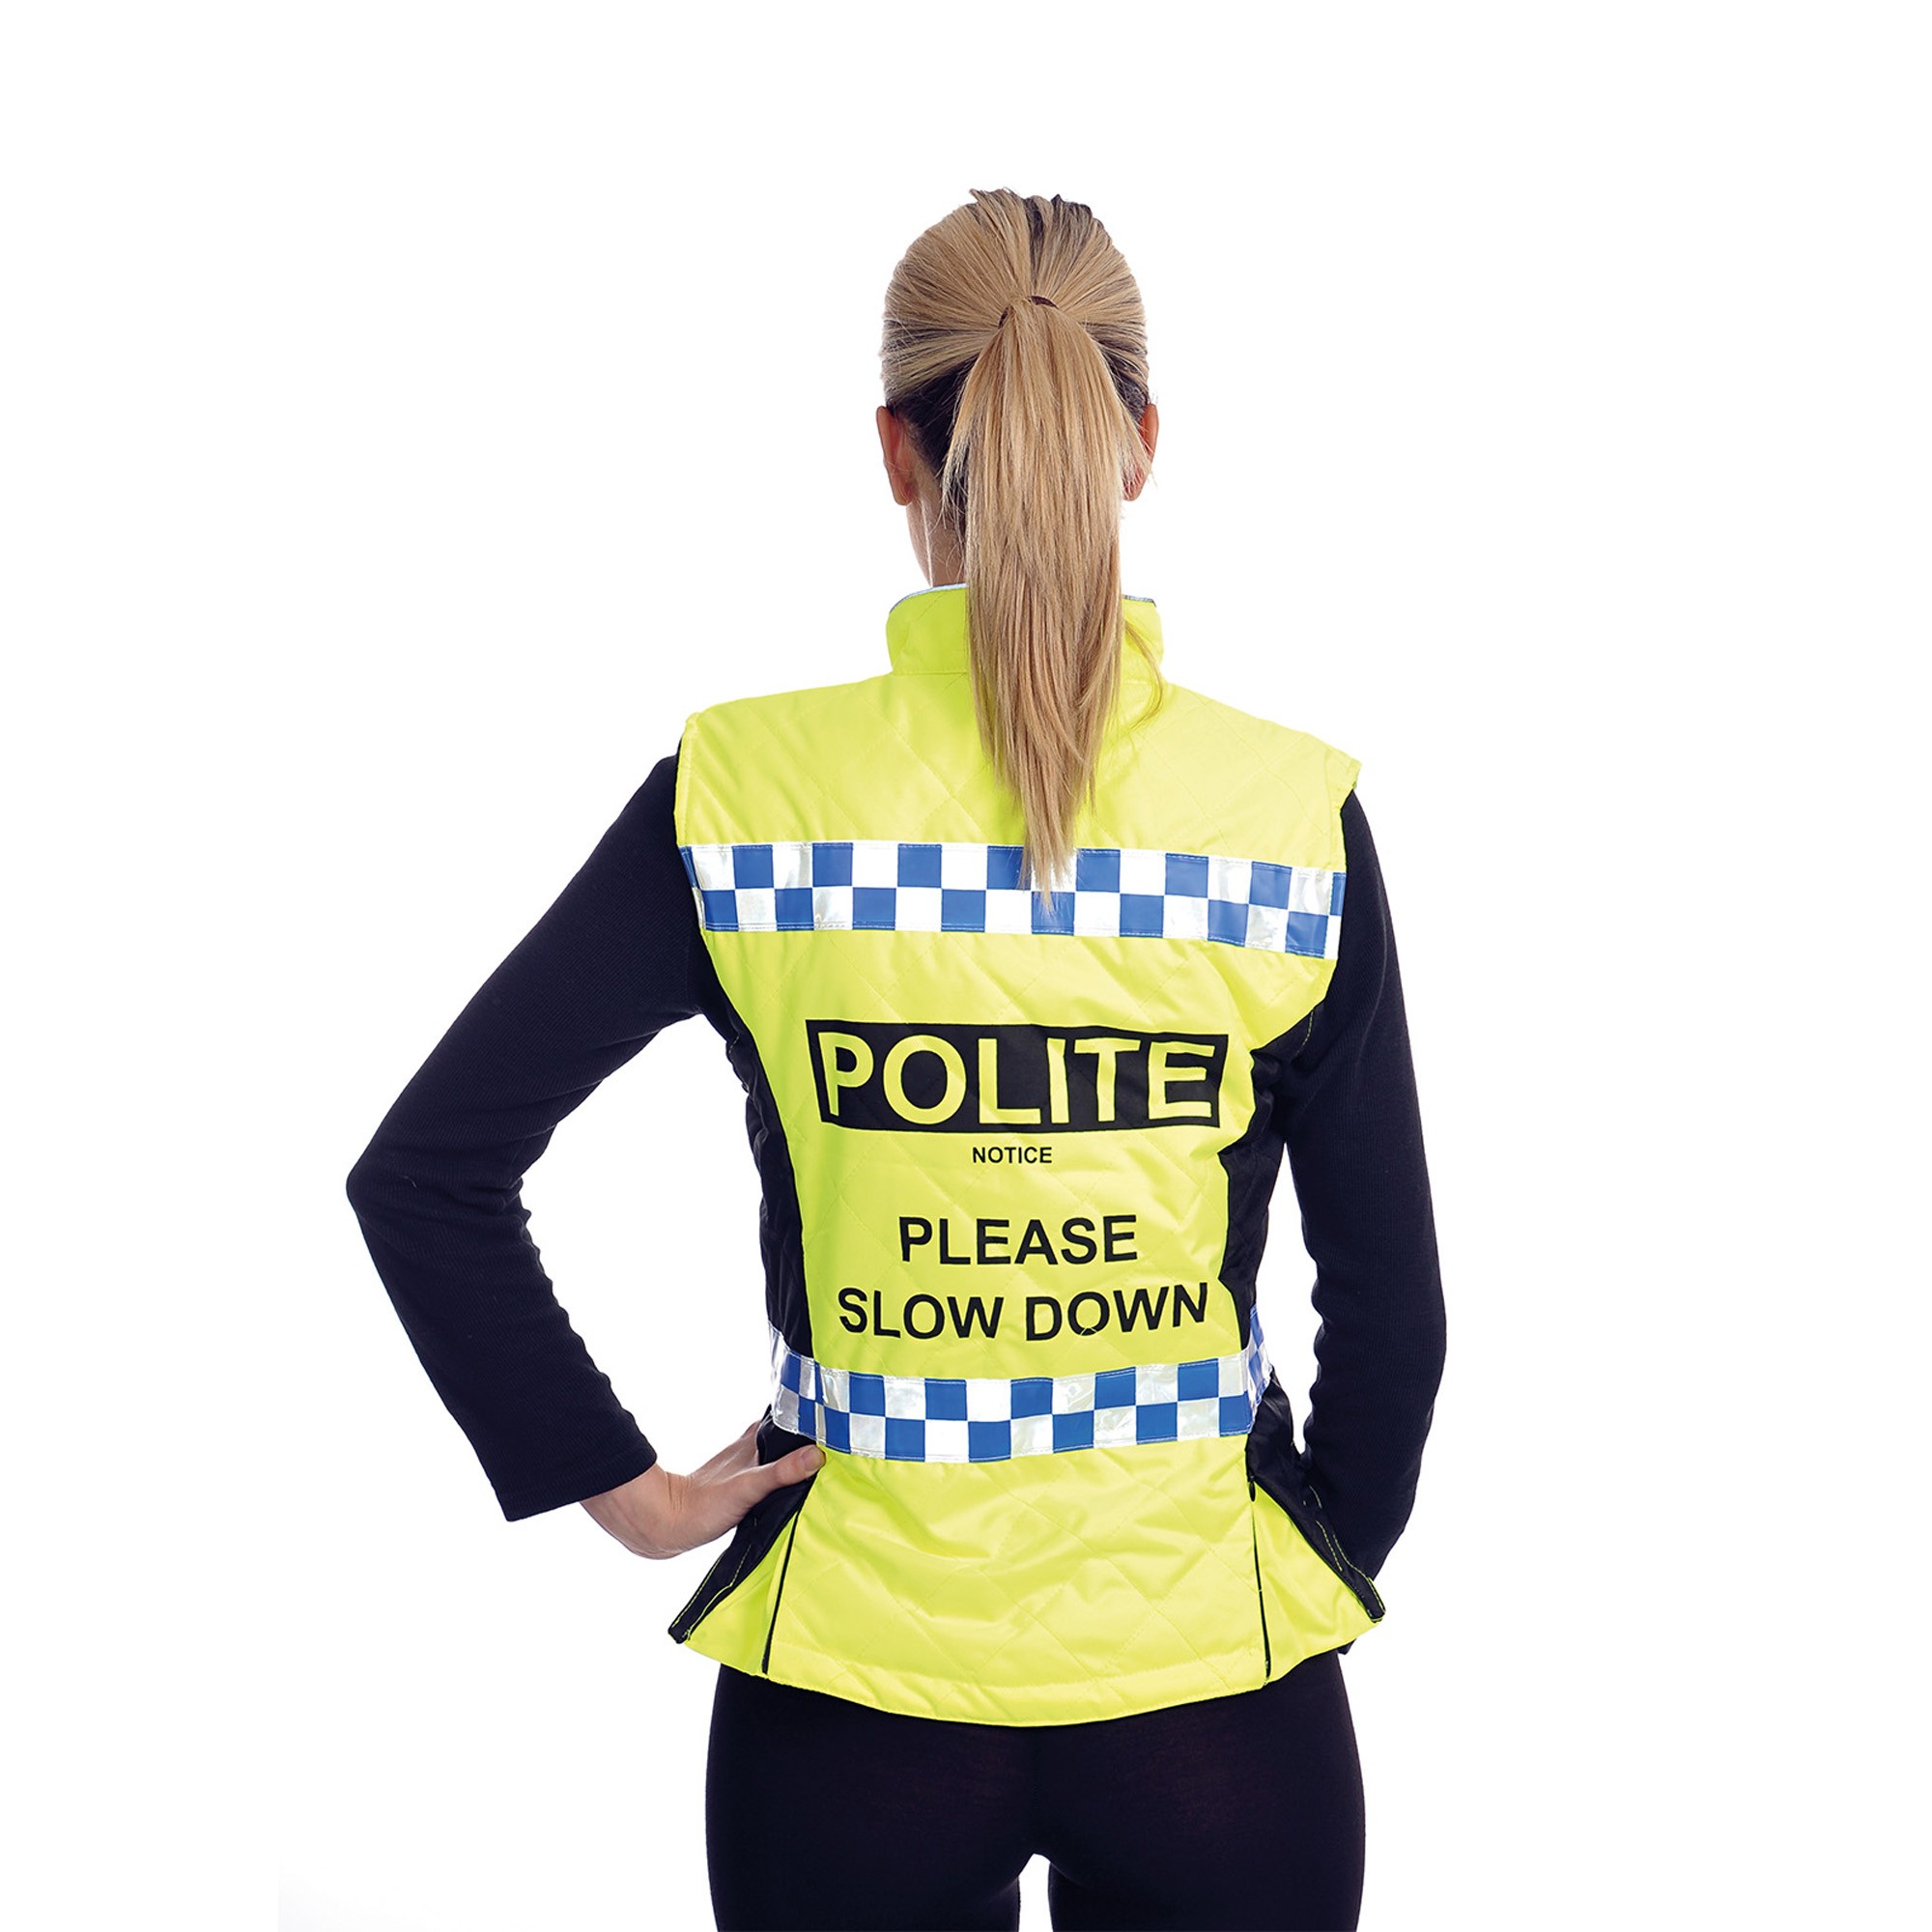 Equisafety Polite Quilted Hi-Vis Flourescent Gilet Please Slow Down Yellow S-XL 